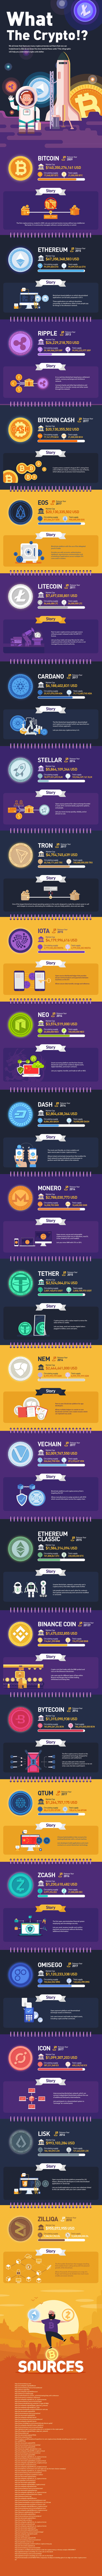 cryptocurrency infographic promo bitcoinplay